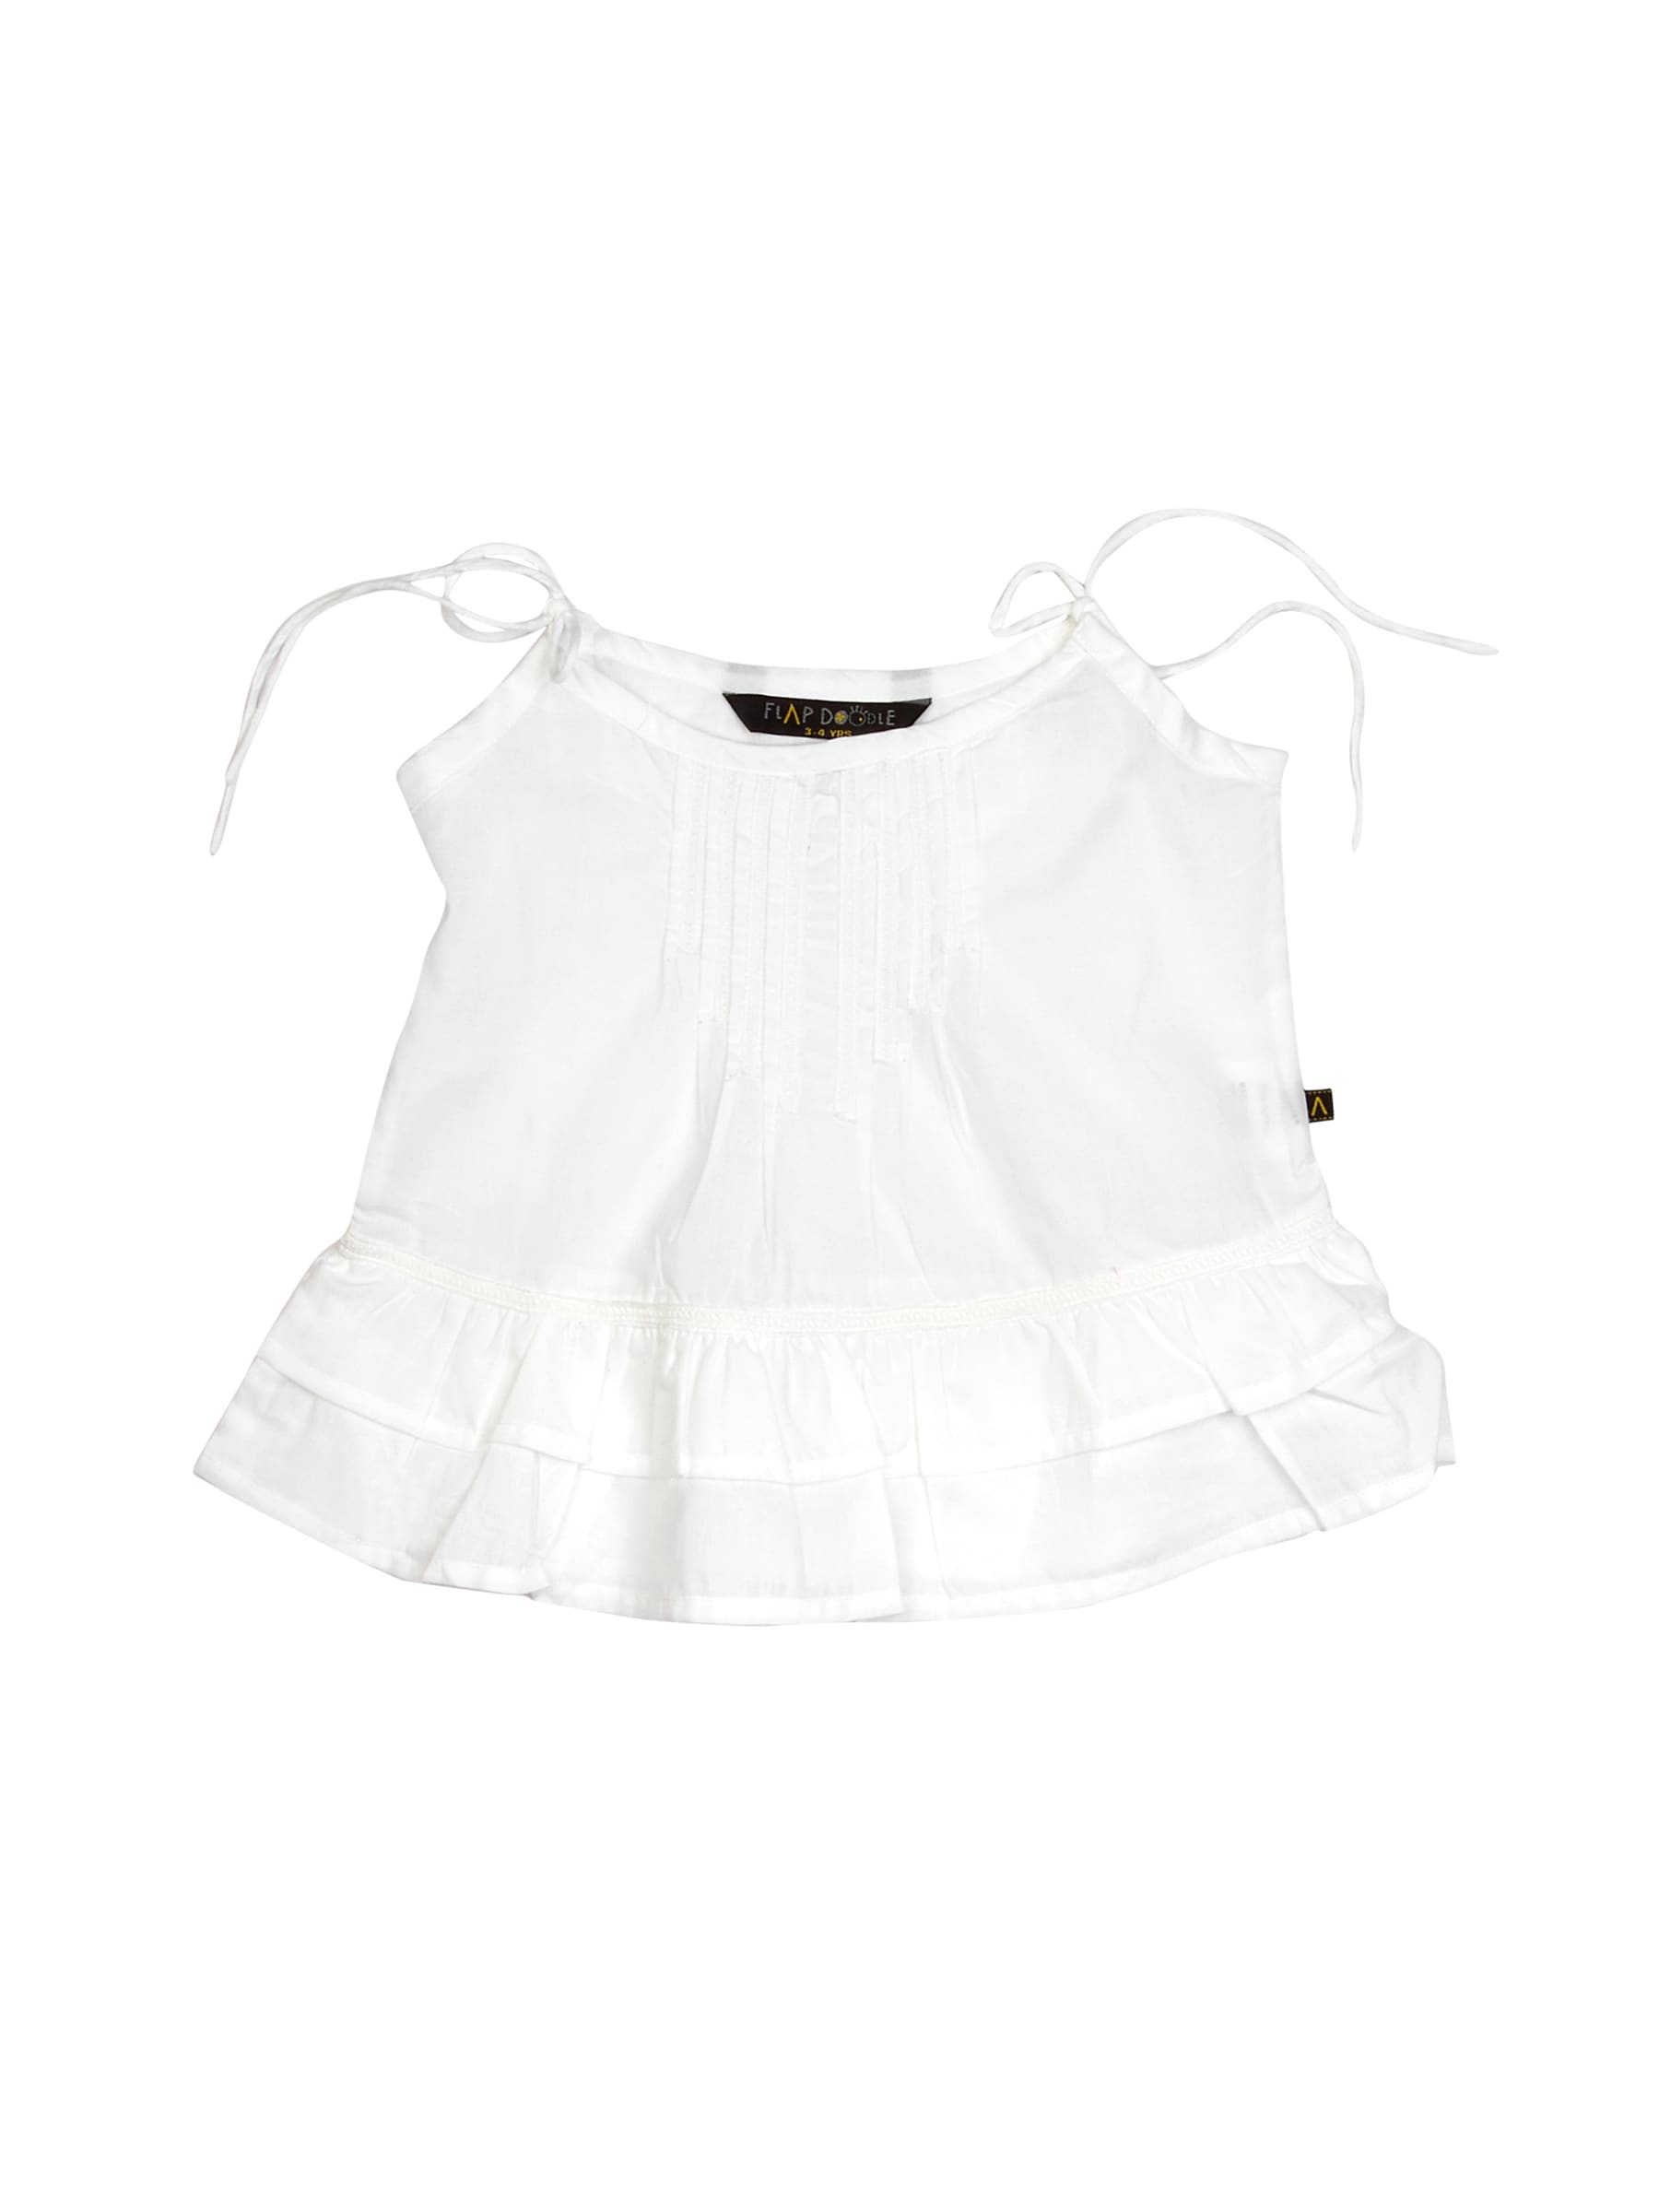 Doodle Girl Little frock White Tops